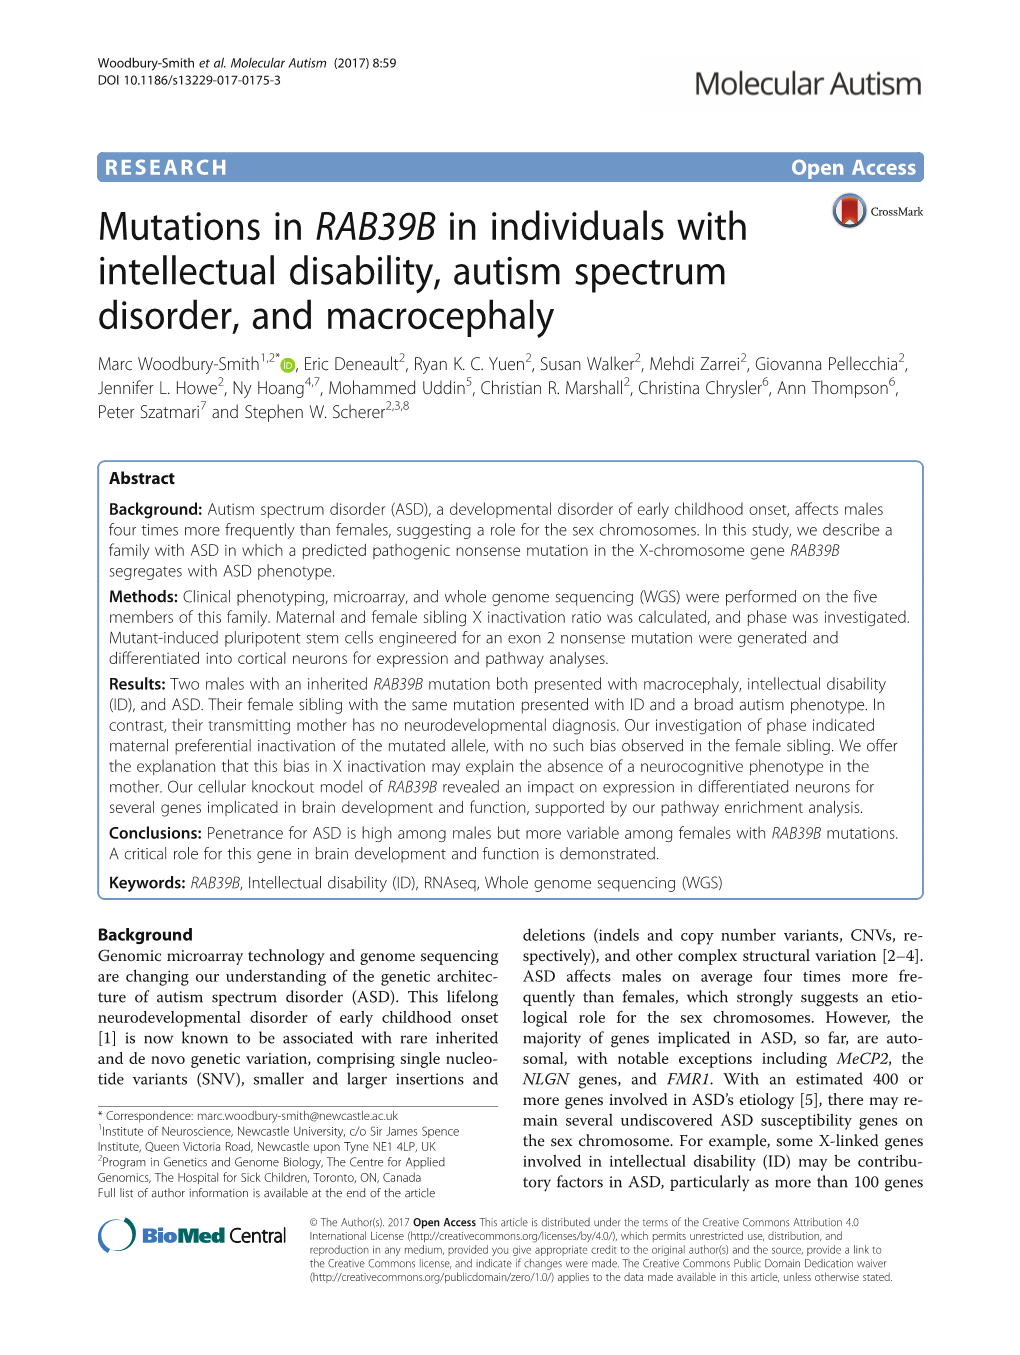 Mutations in RAB39B in Individuals with Intellectual Disability, Autism Spectrum Disorder, and Macrocephaly Marc Woodbury-Smith1,2* , Eric Deneault2, Ryan K